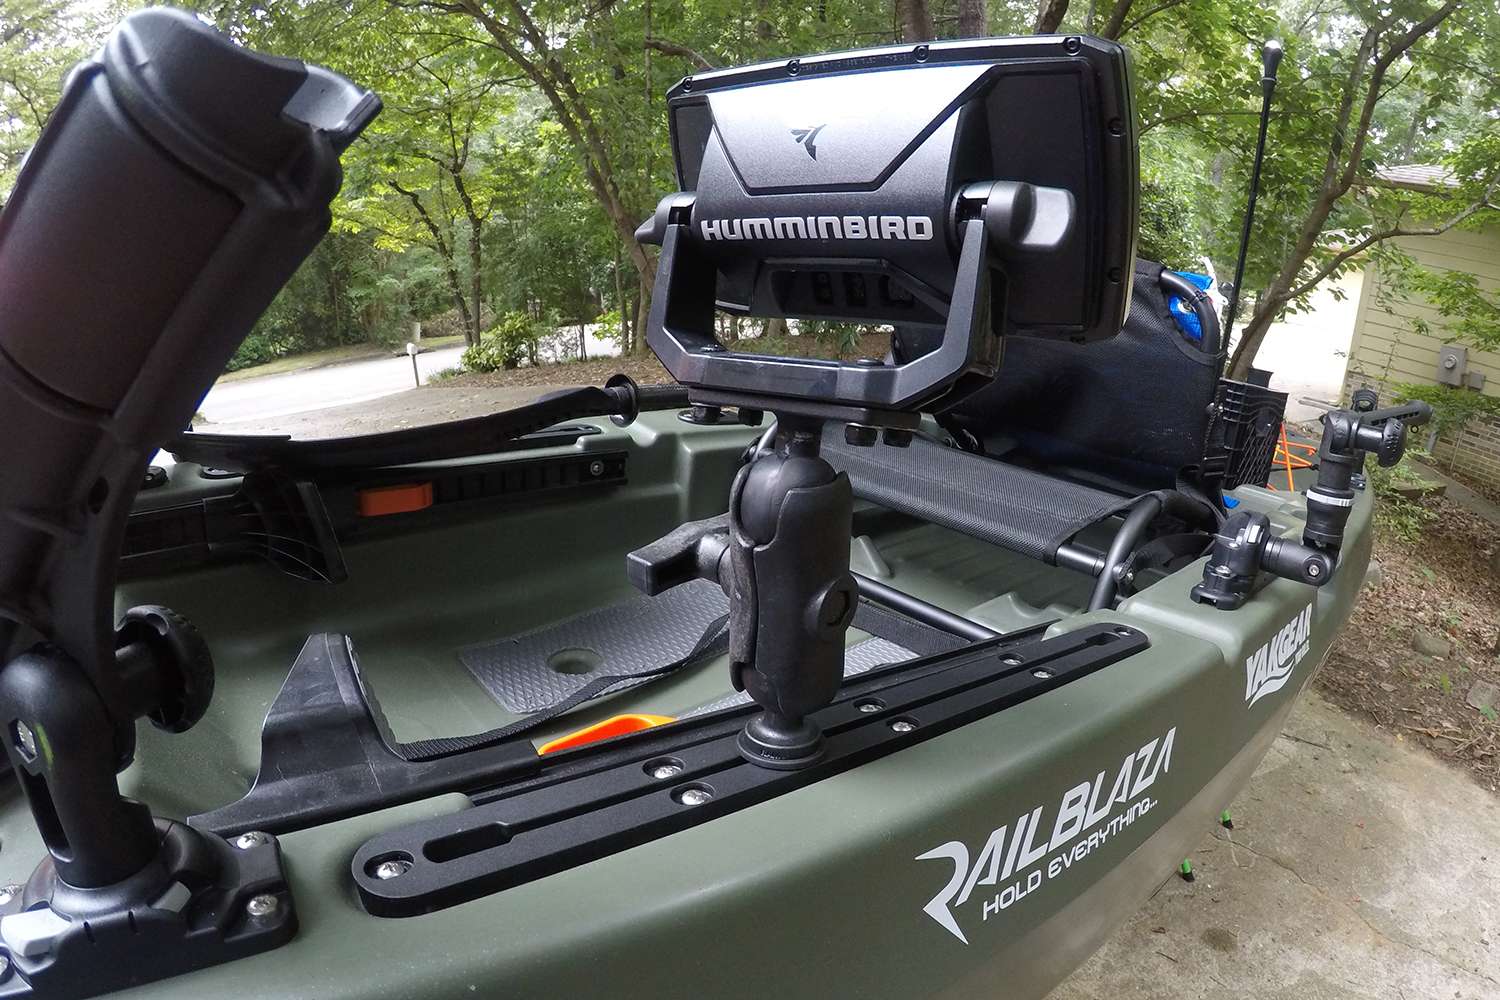 On the primary track that comes standard with the Topwater kayak is a Humminbird Helix 5. It's not yet hooked up to the transducer, but that's the next project. 